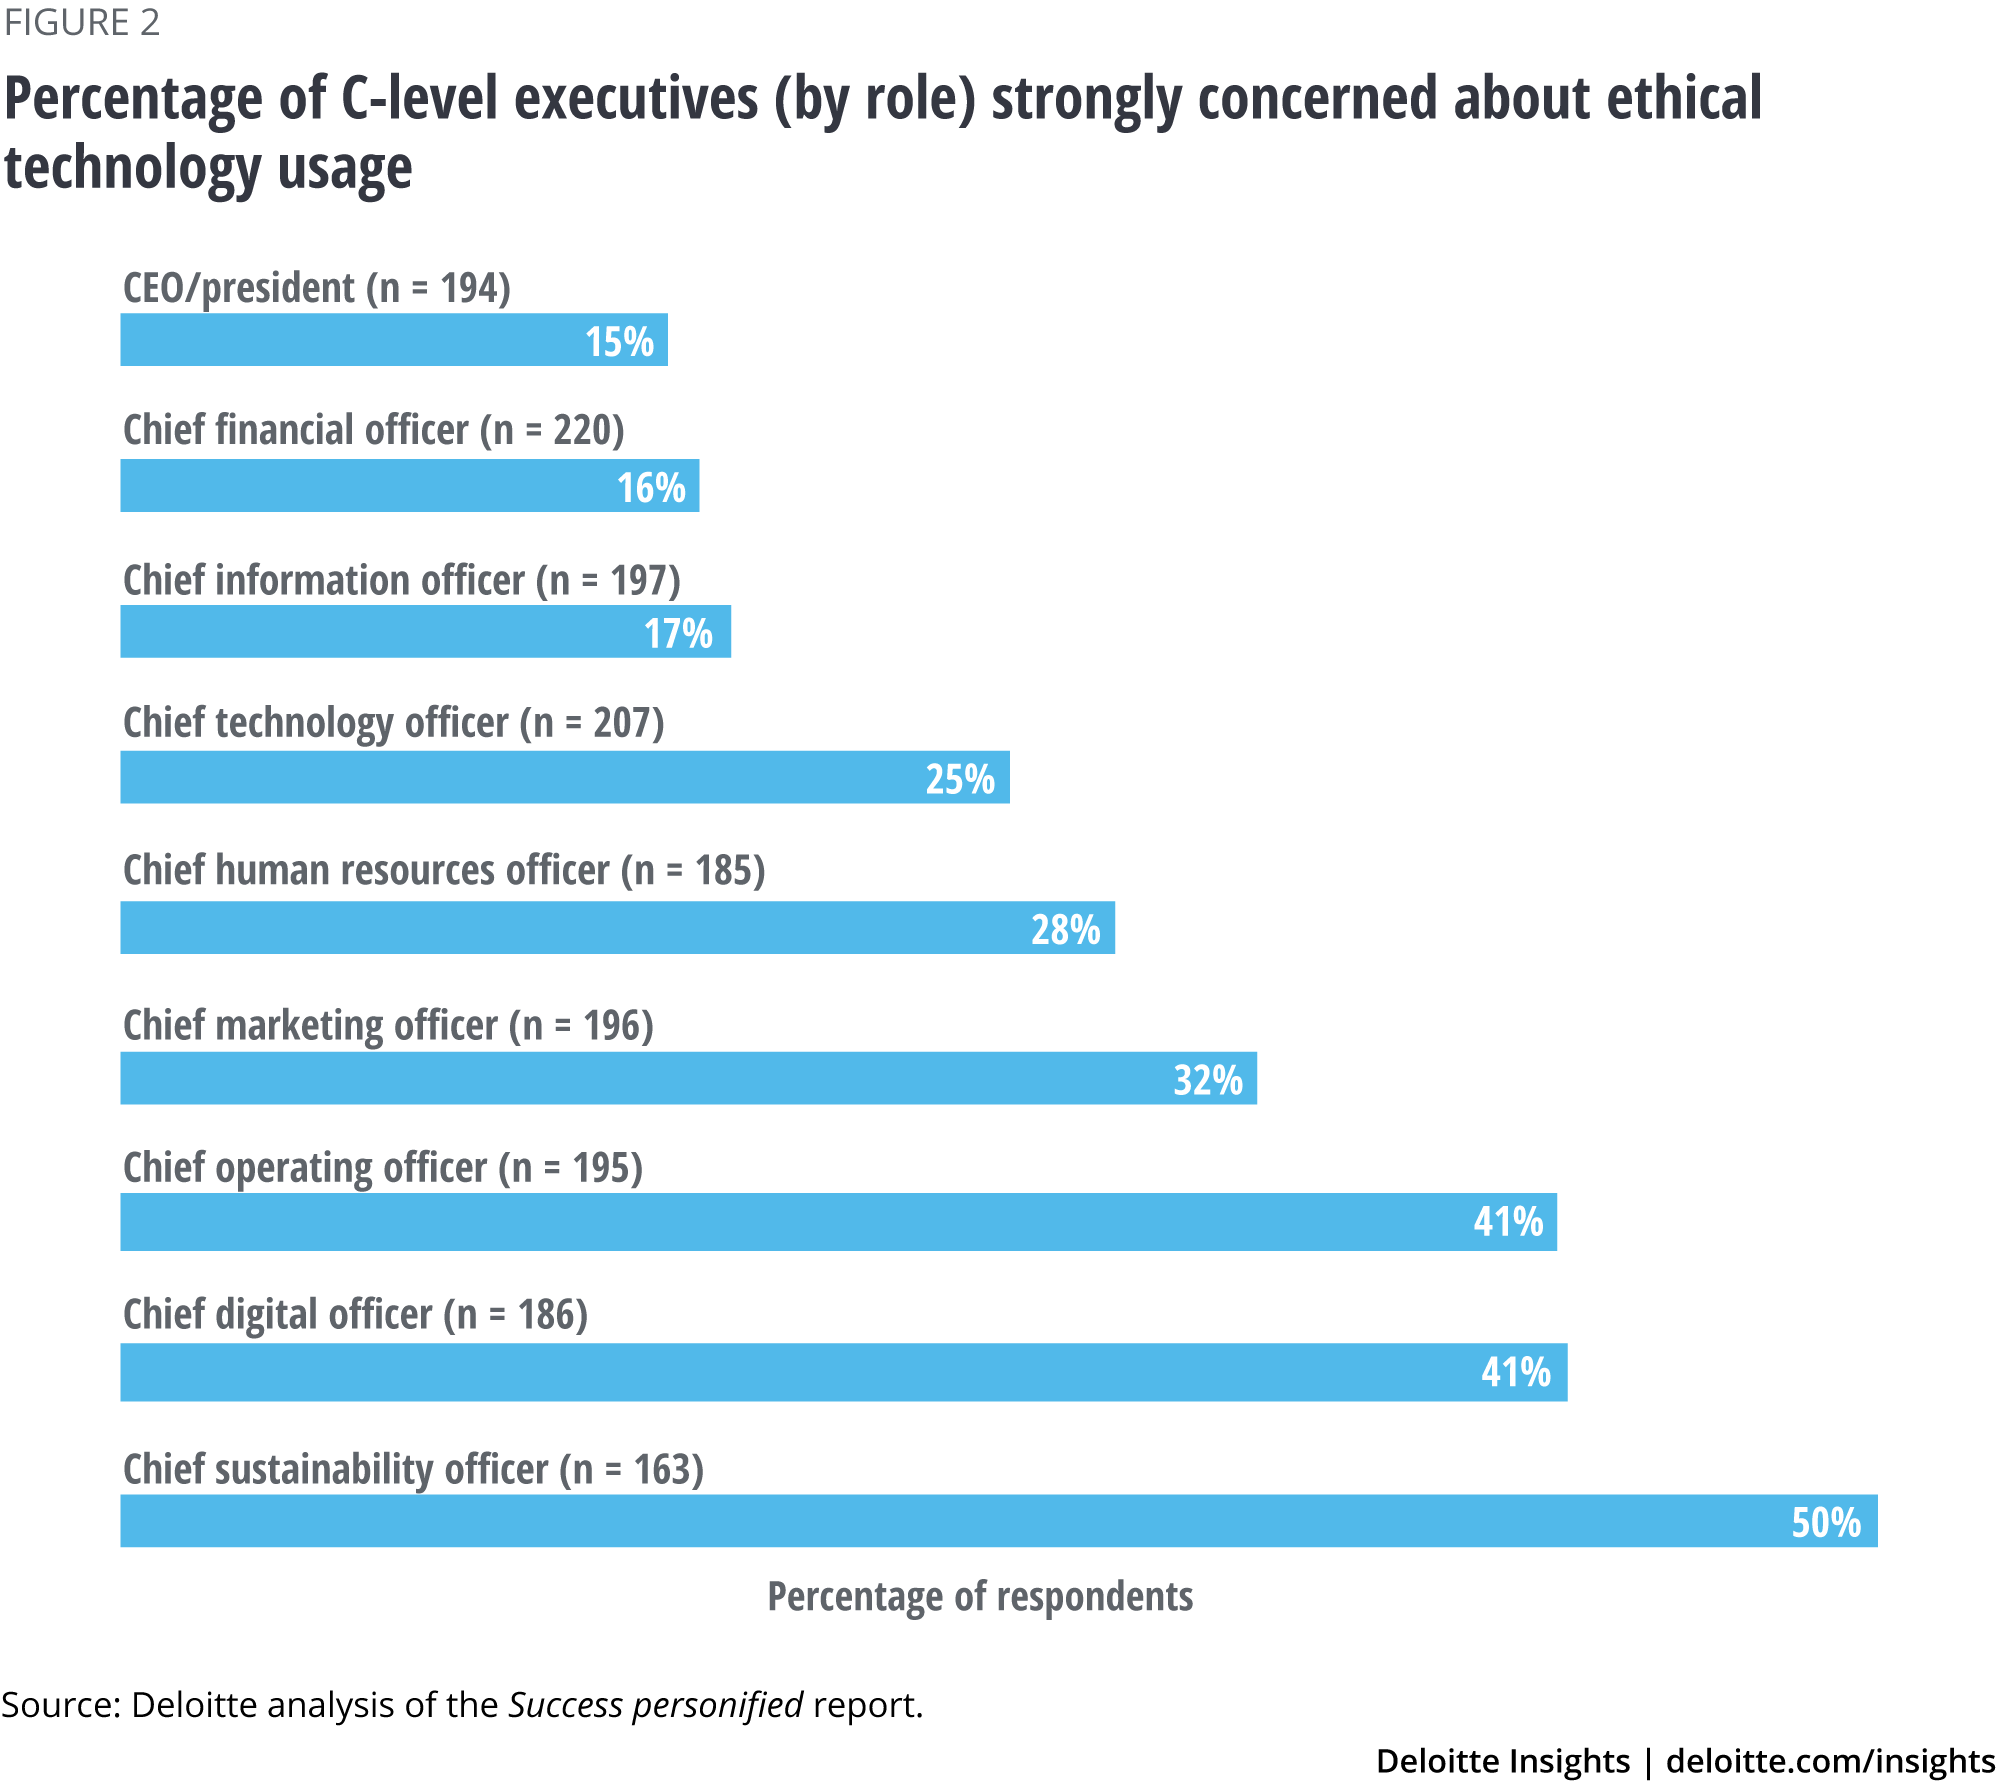 Percentage of C-level executives (by role) strongly concerned about ethical technology usage